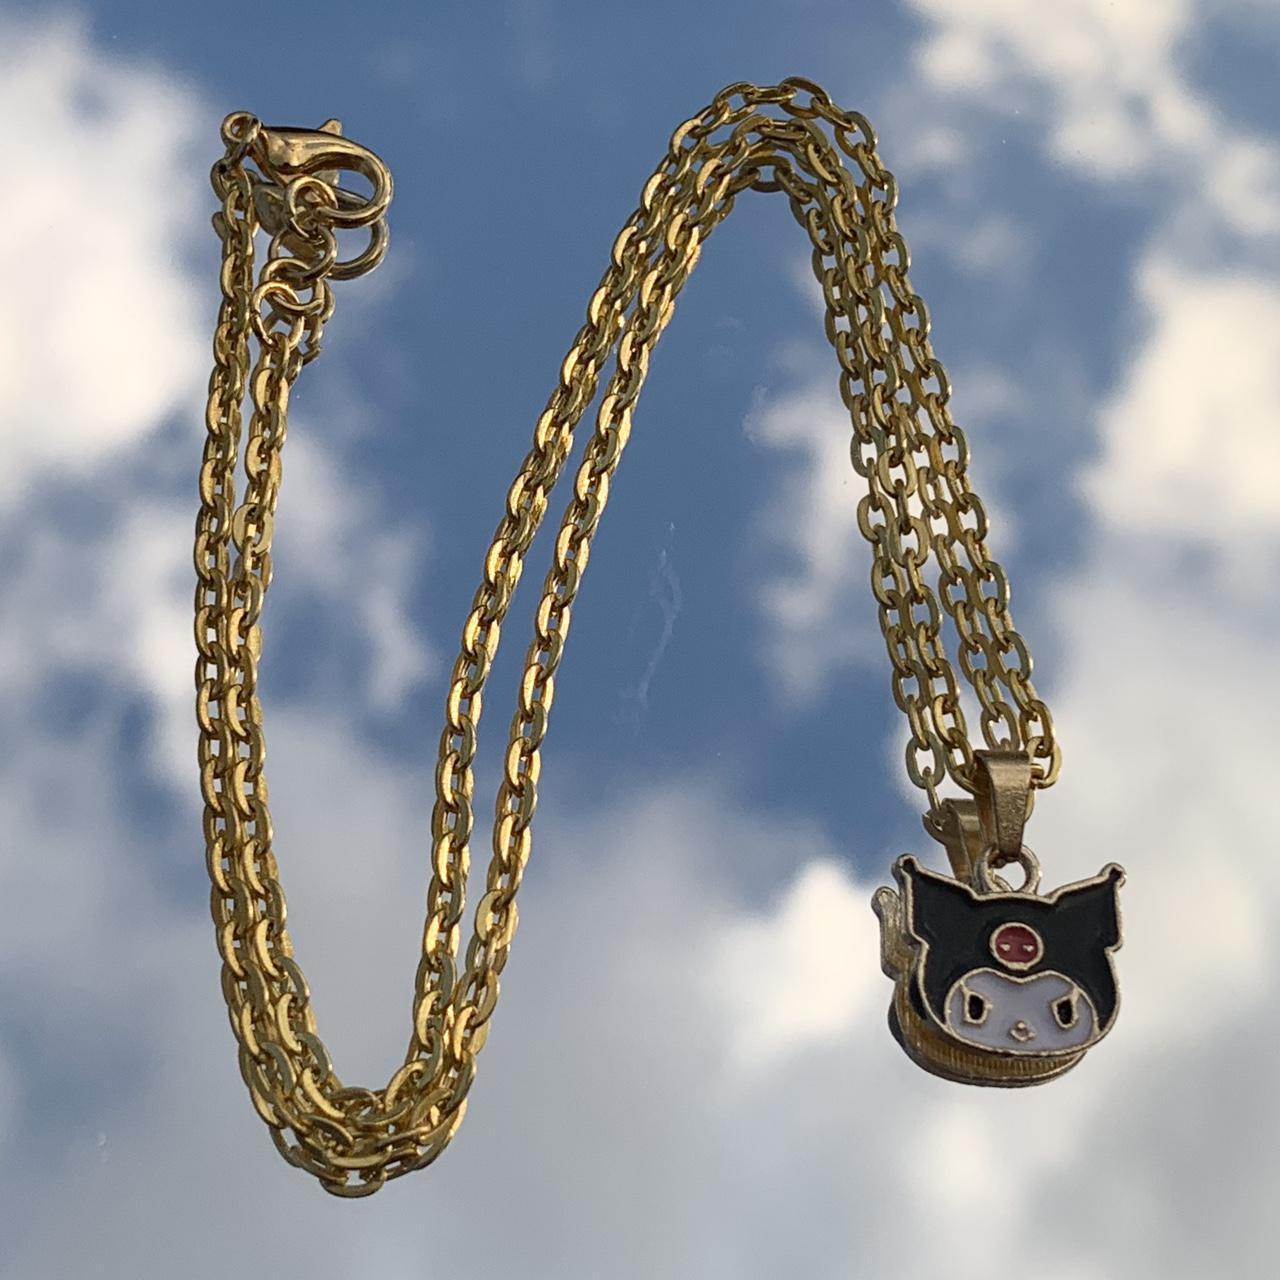 Product Image 2 - kuromi necklace

• the necklace is